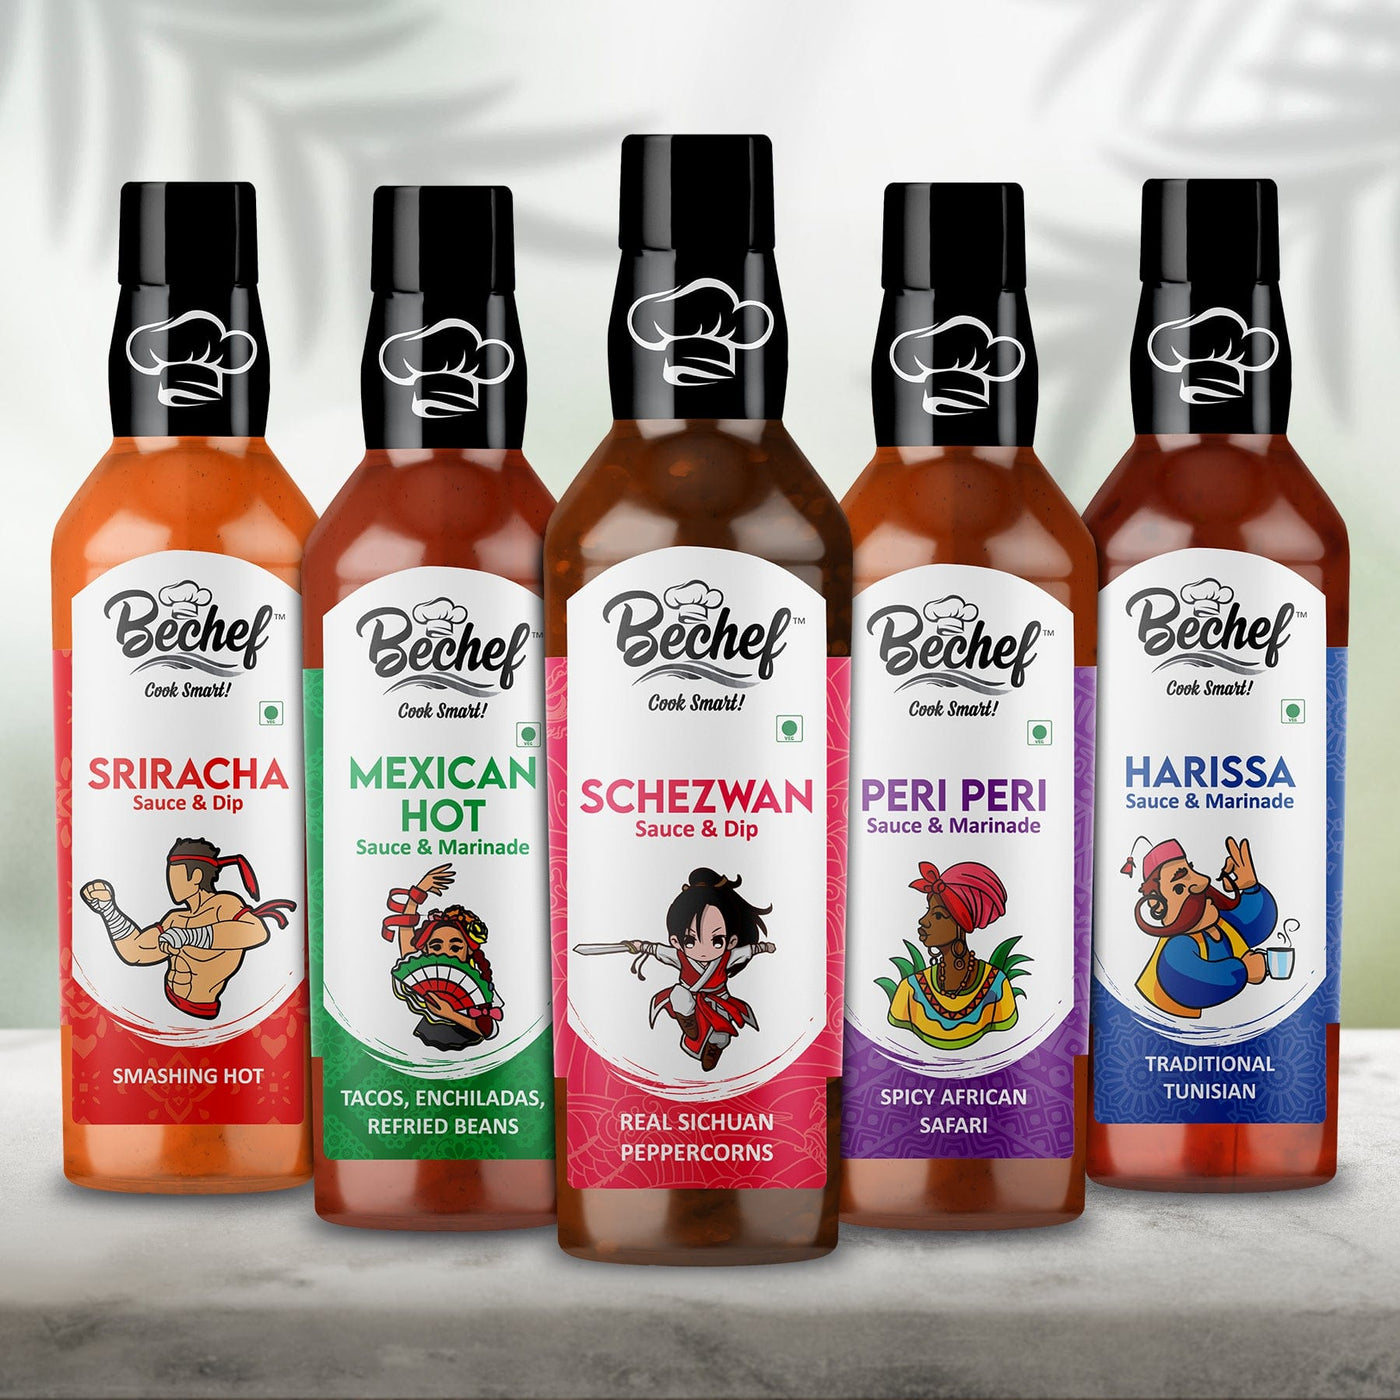 Hot Hot Sauce Combo : Super Spicy Hot Sauces : Use as Chutney, Dip, Topping or Cooking Sauces - Bechef - Gourmet Pantry Essentials